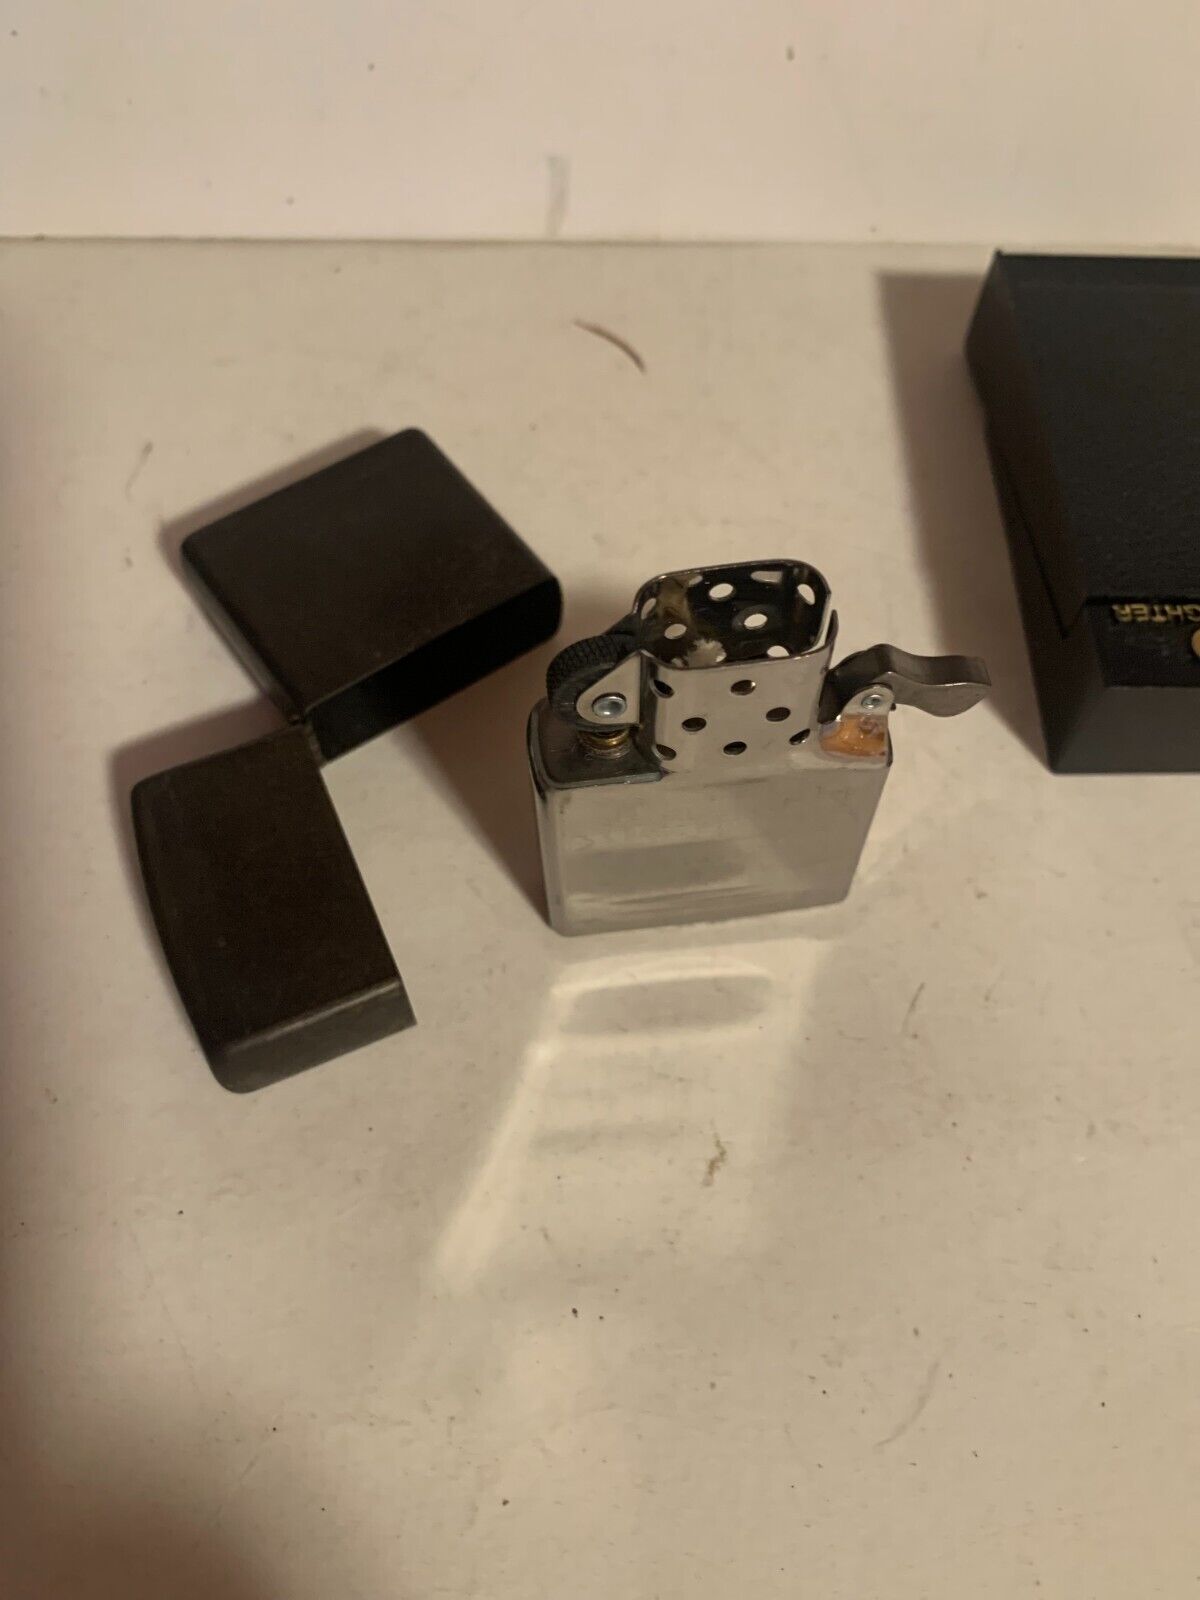 ZIPPO LIGHTER BRUSHED CHROME? 2001 NEW WITH BOX